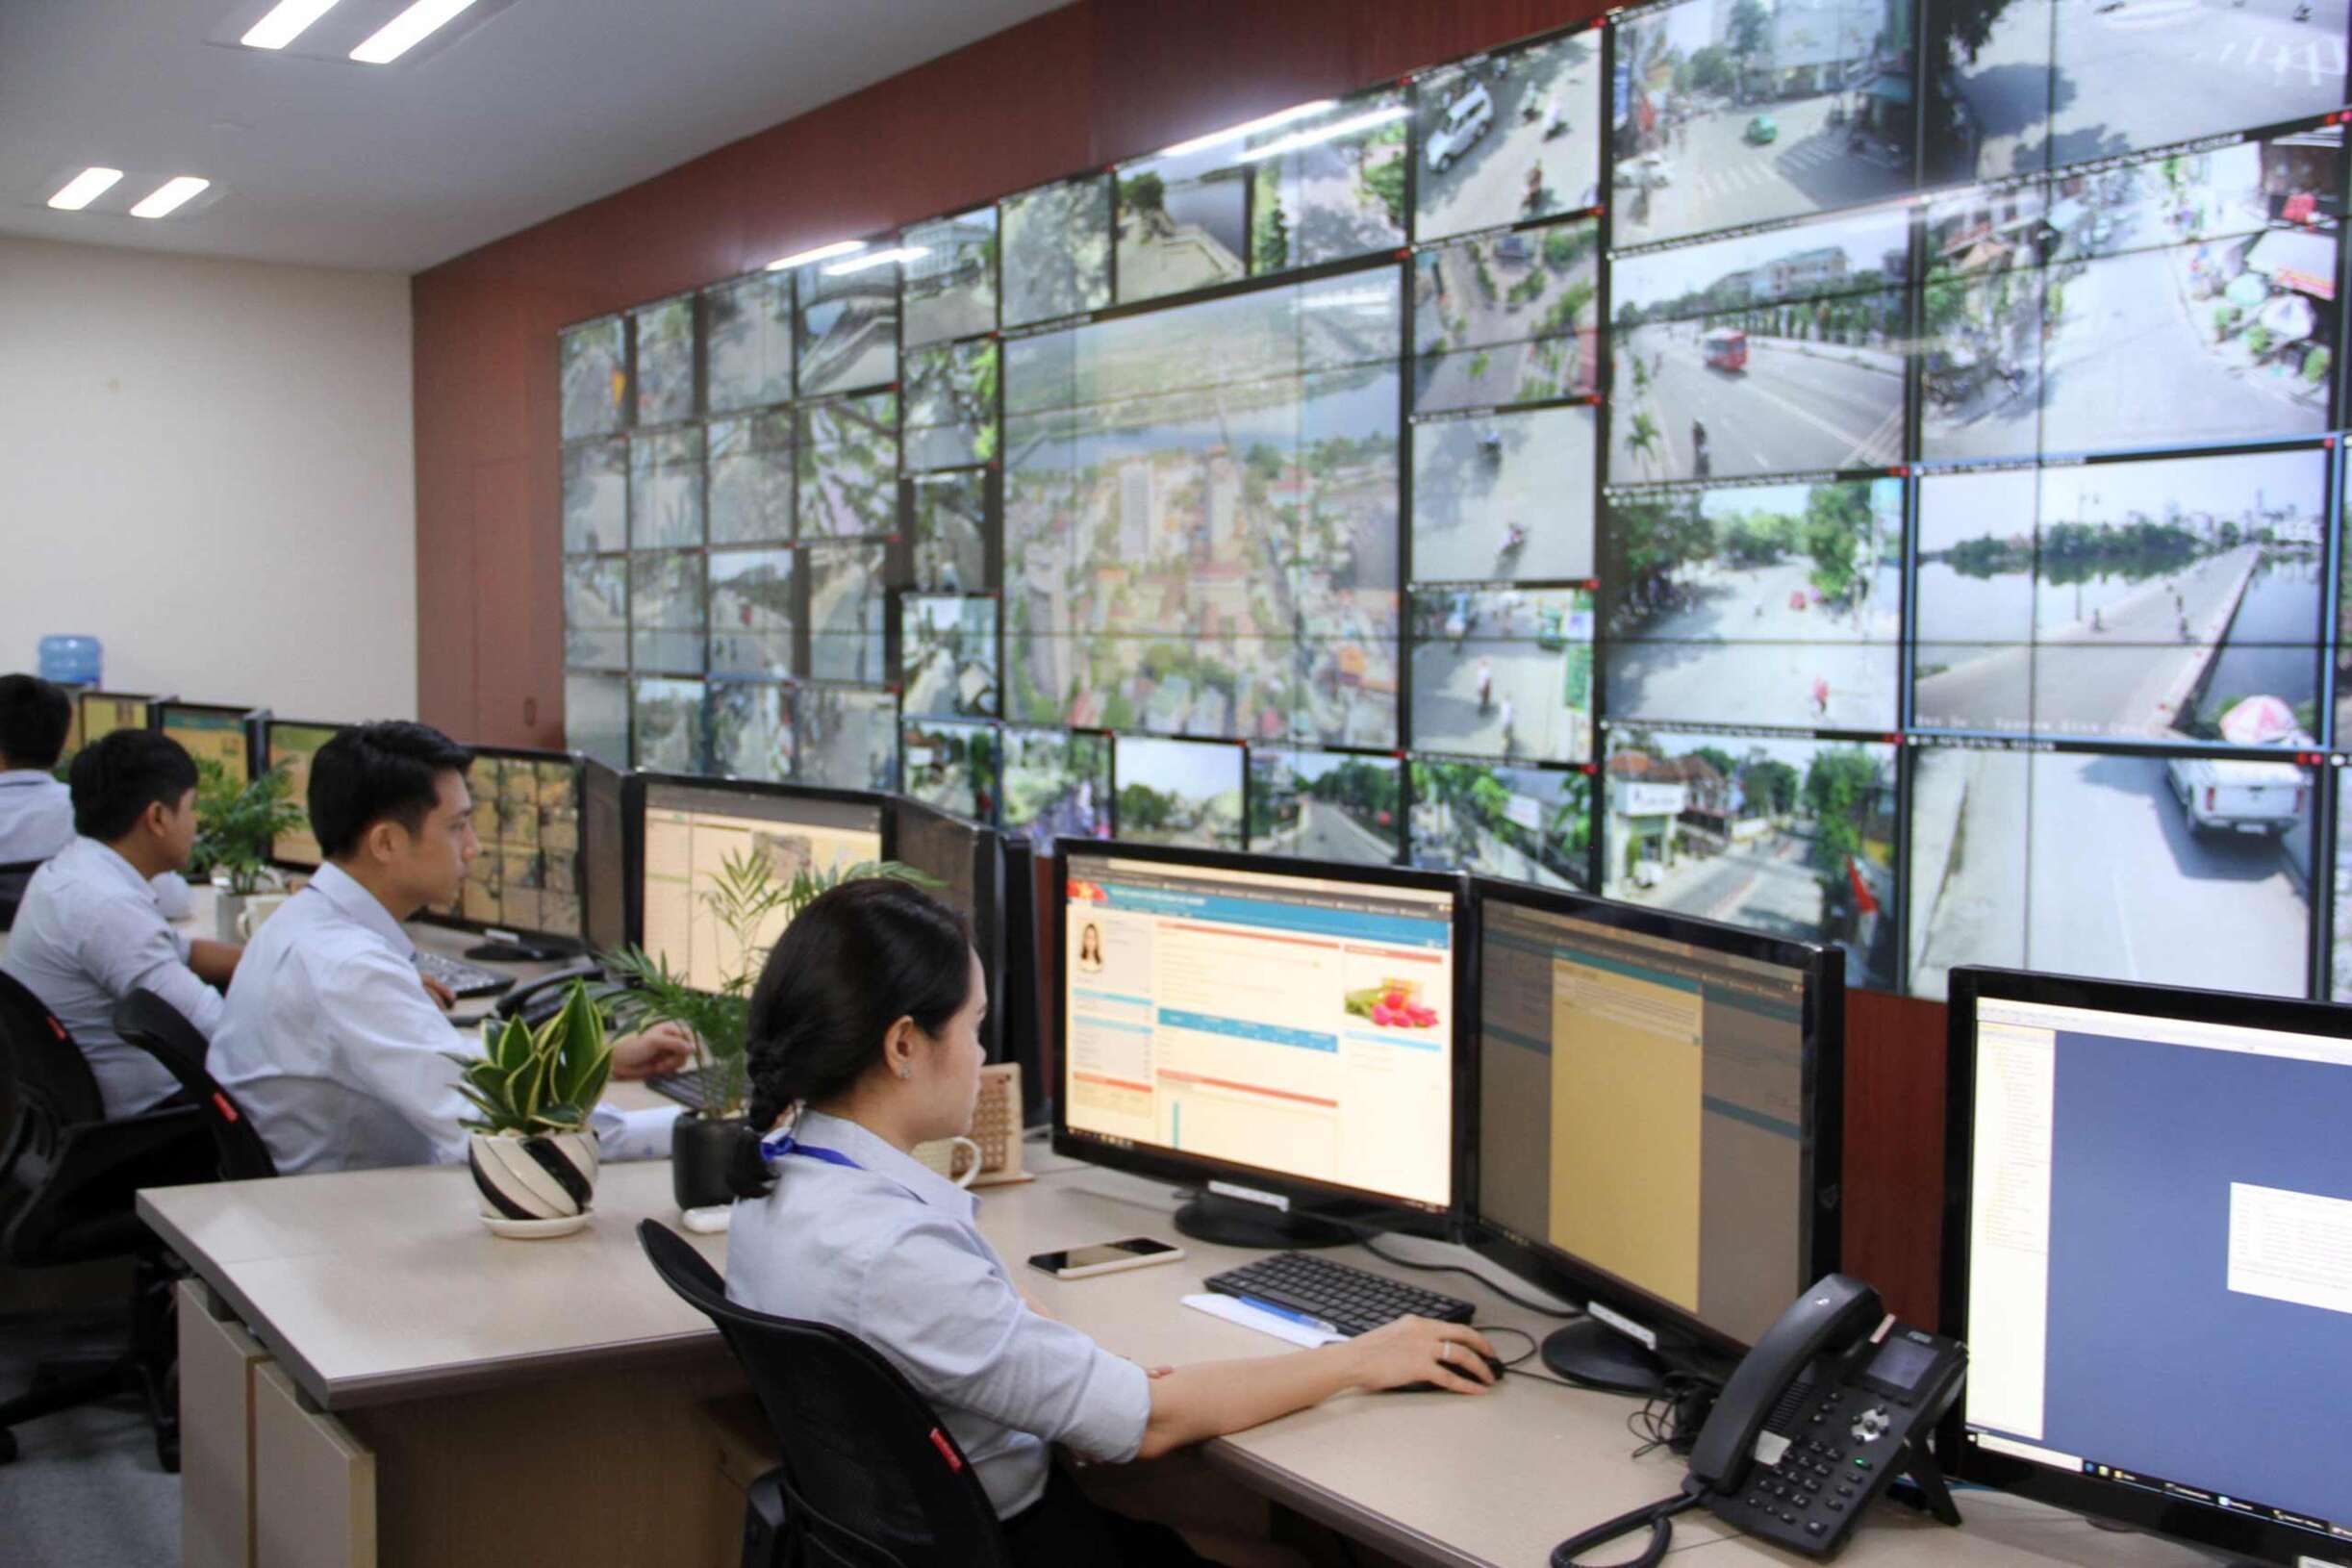 Hue residents take active role in building smart city